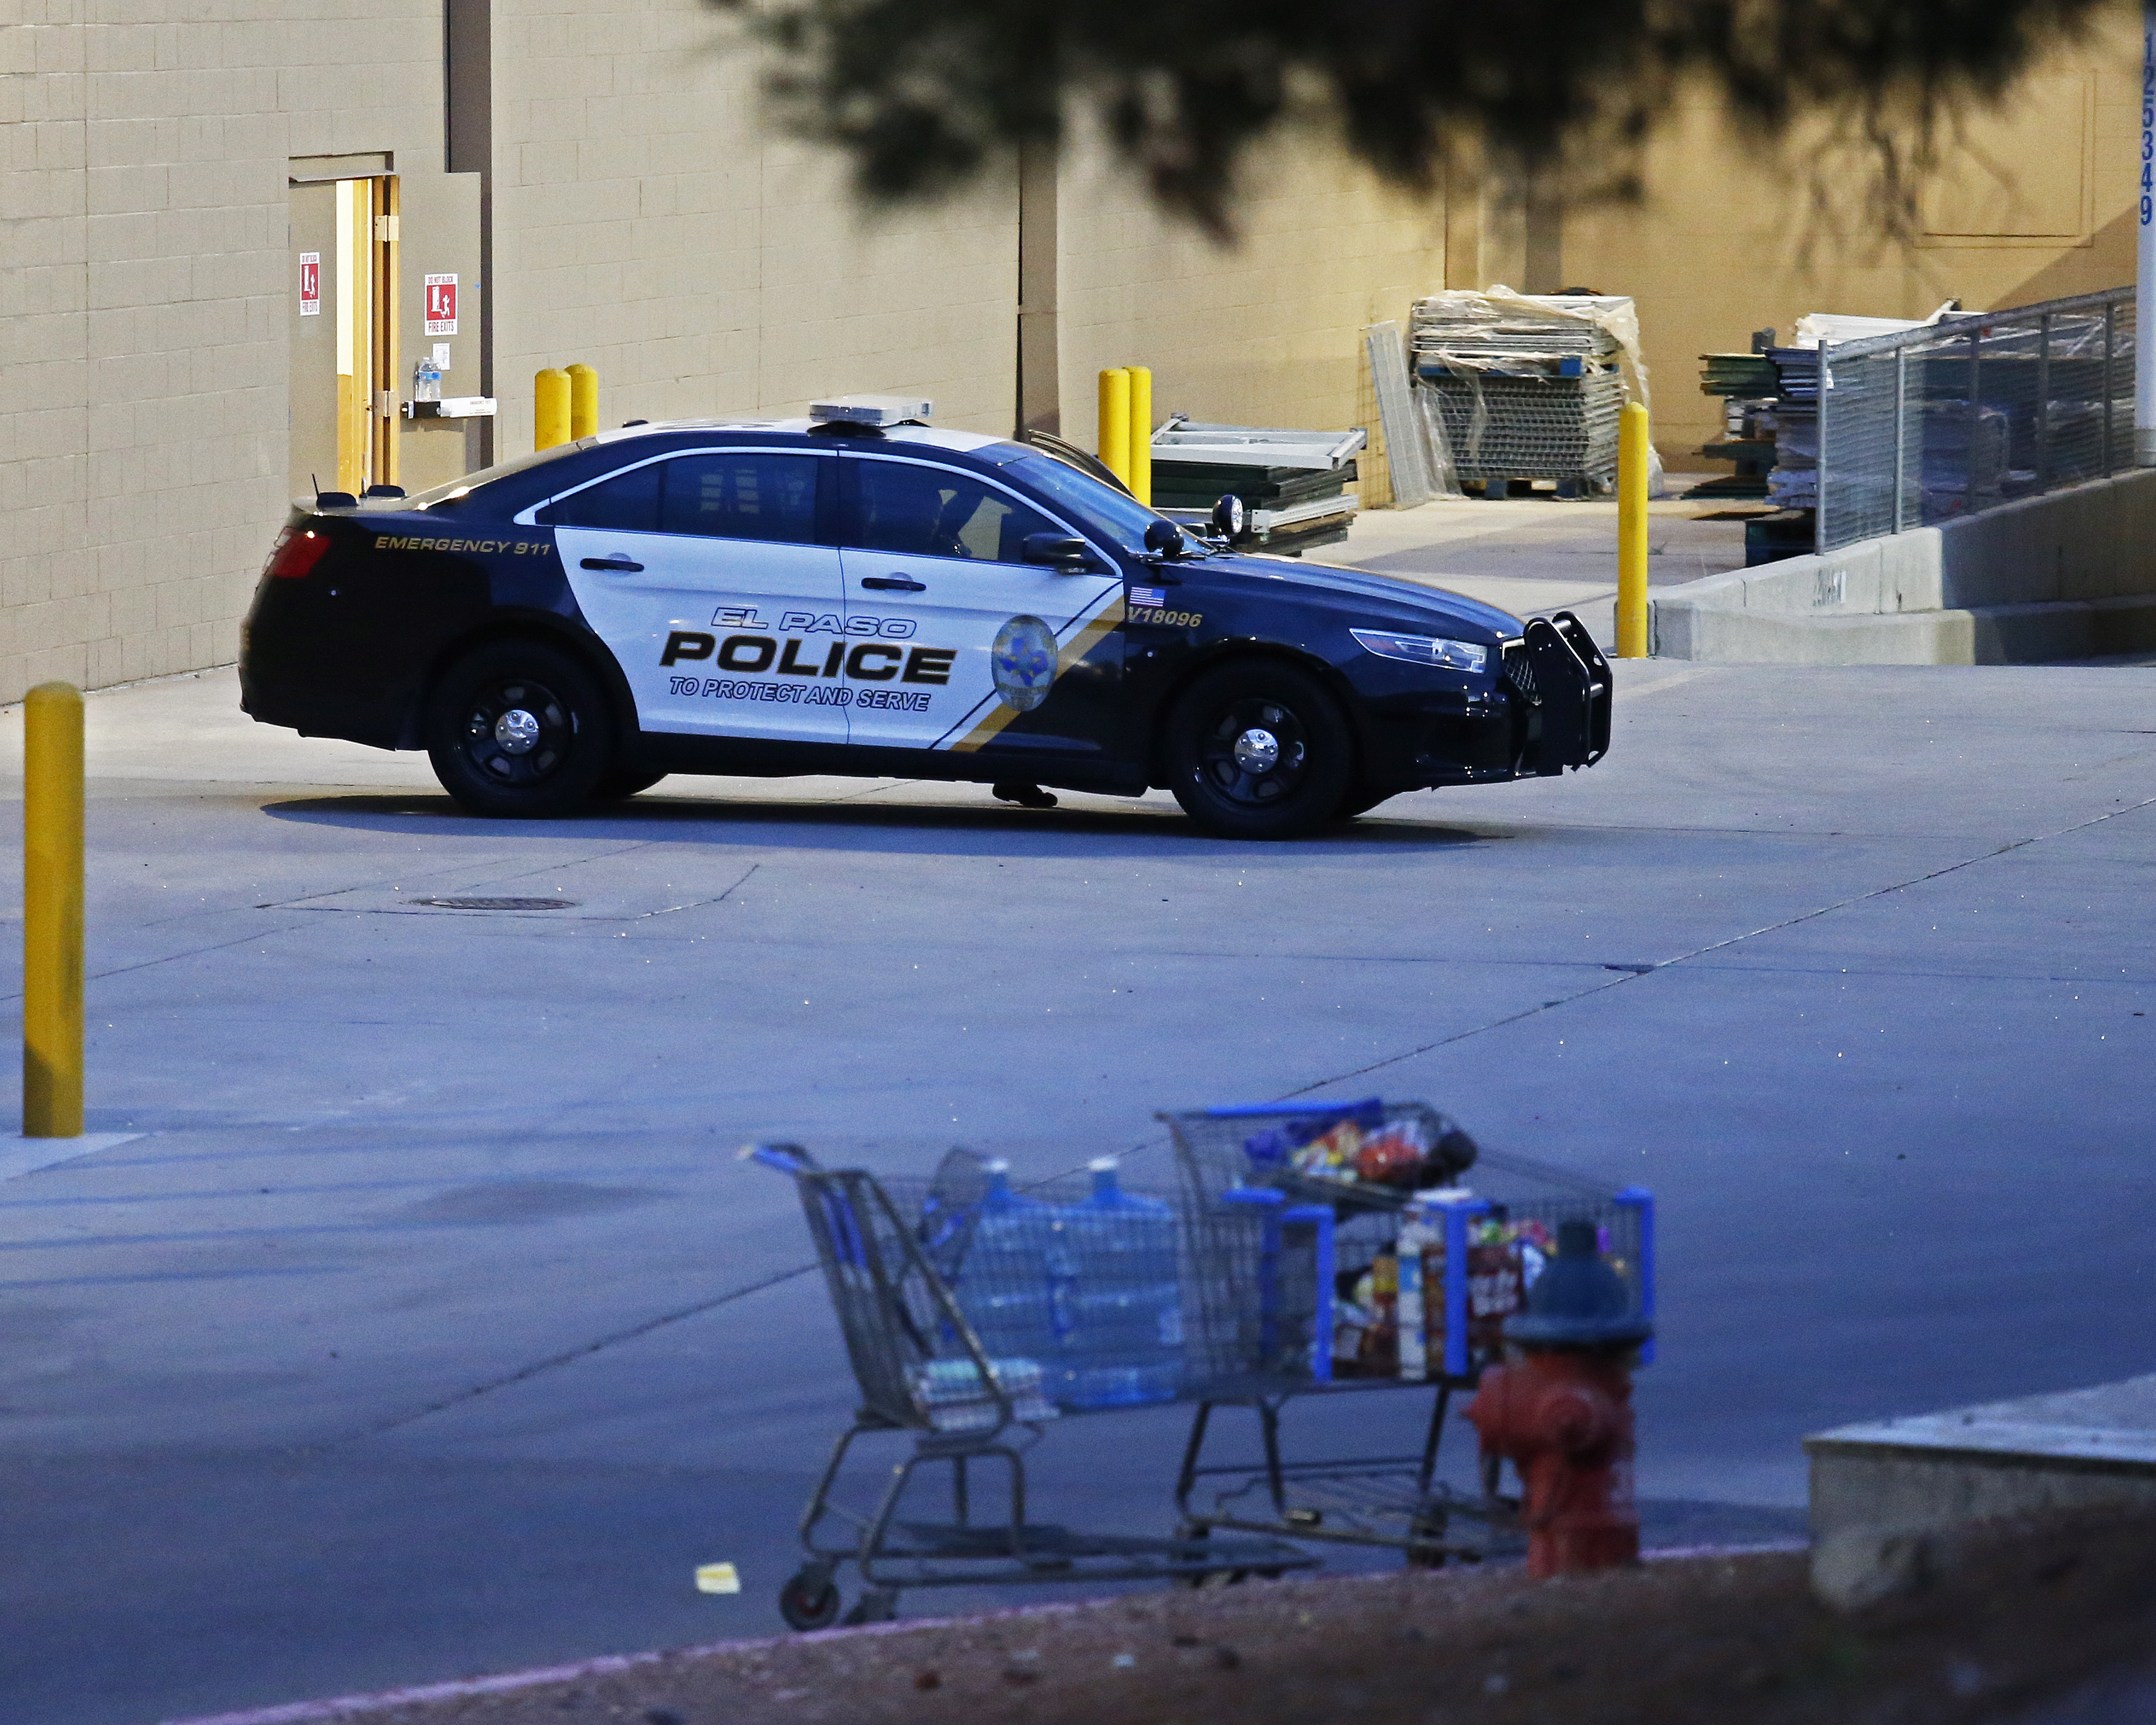 epa07756173 Police outside the cirme scene as officers continue investigating the mass shooting at a Walmart in El Paso, Texas, 04 August 2019. Reports state that twenty people were confirmed killed and many more injured on 03 August 2019 by a lone gunman at a Walmart at the Cielo Vista Mall.  EPA/LARRY W. SMITH